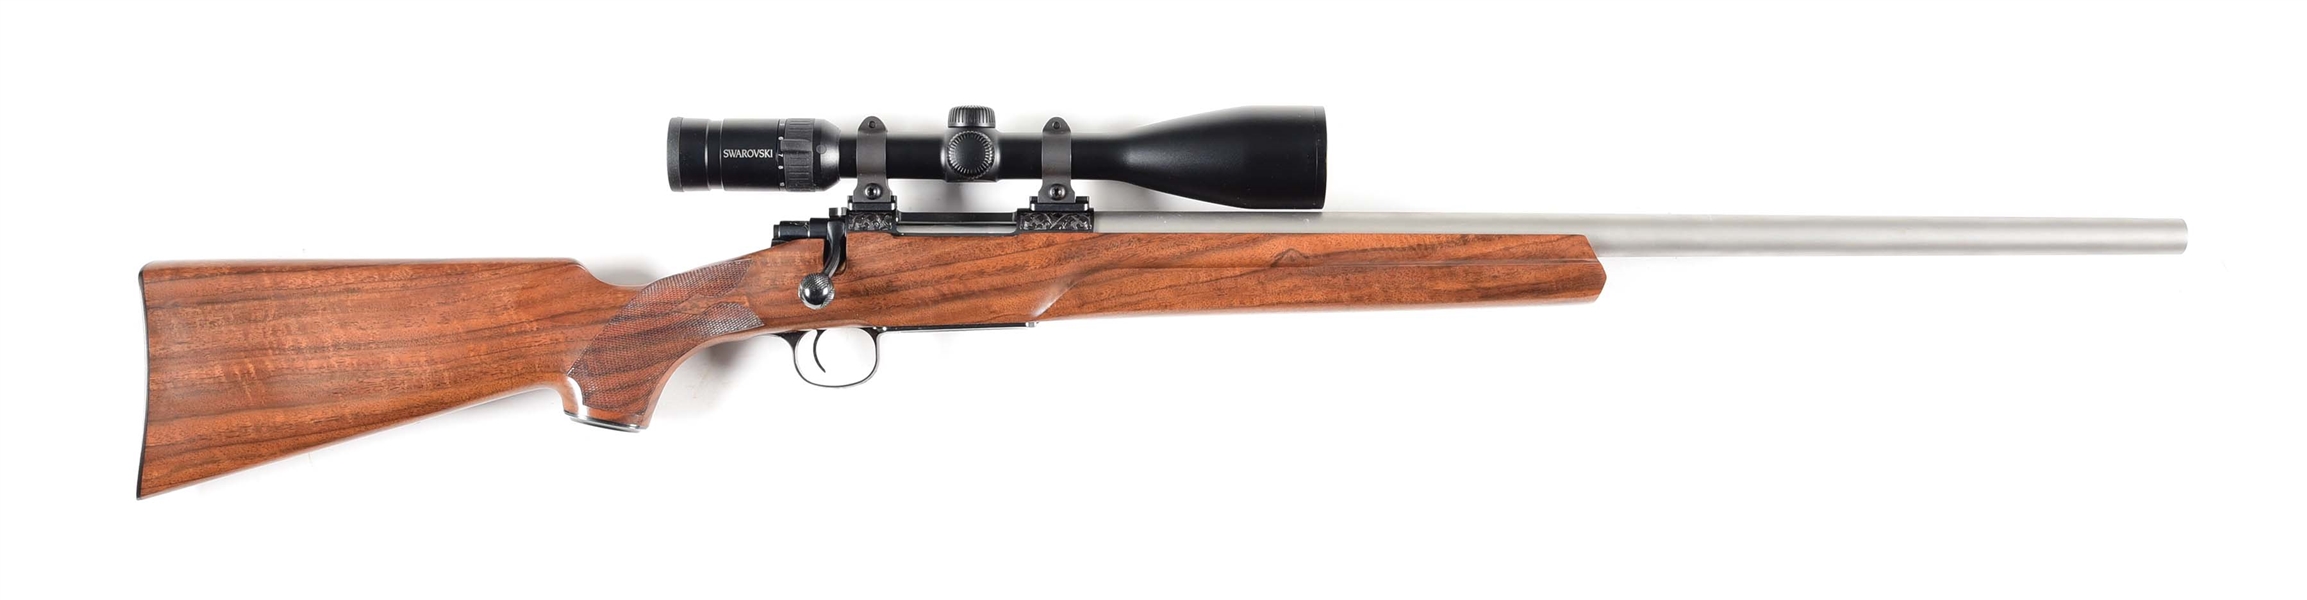 (M) COOPER 51 BOLT ACTION RIFLE WITH SCOPE.